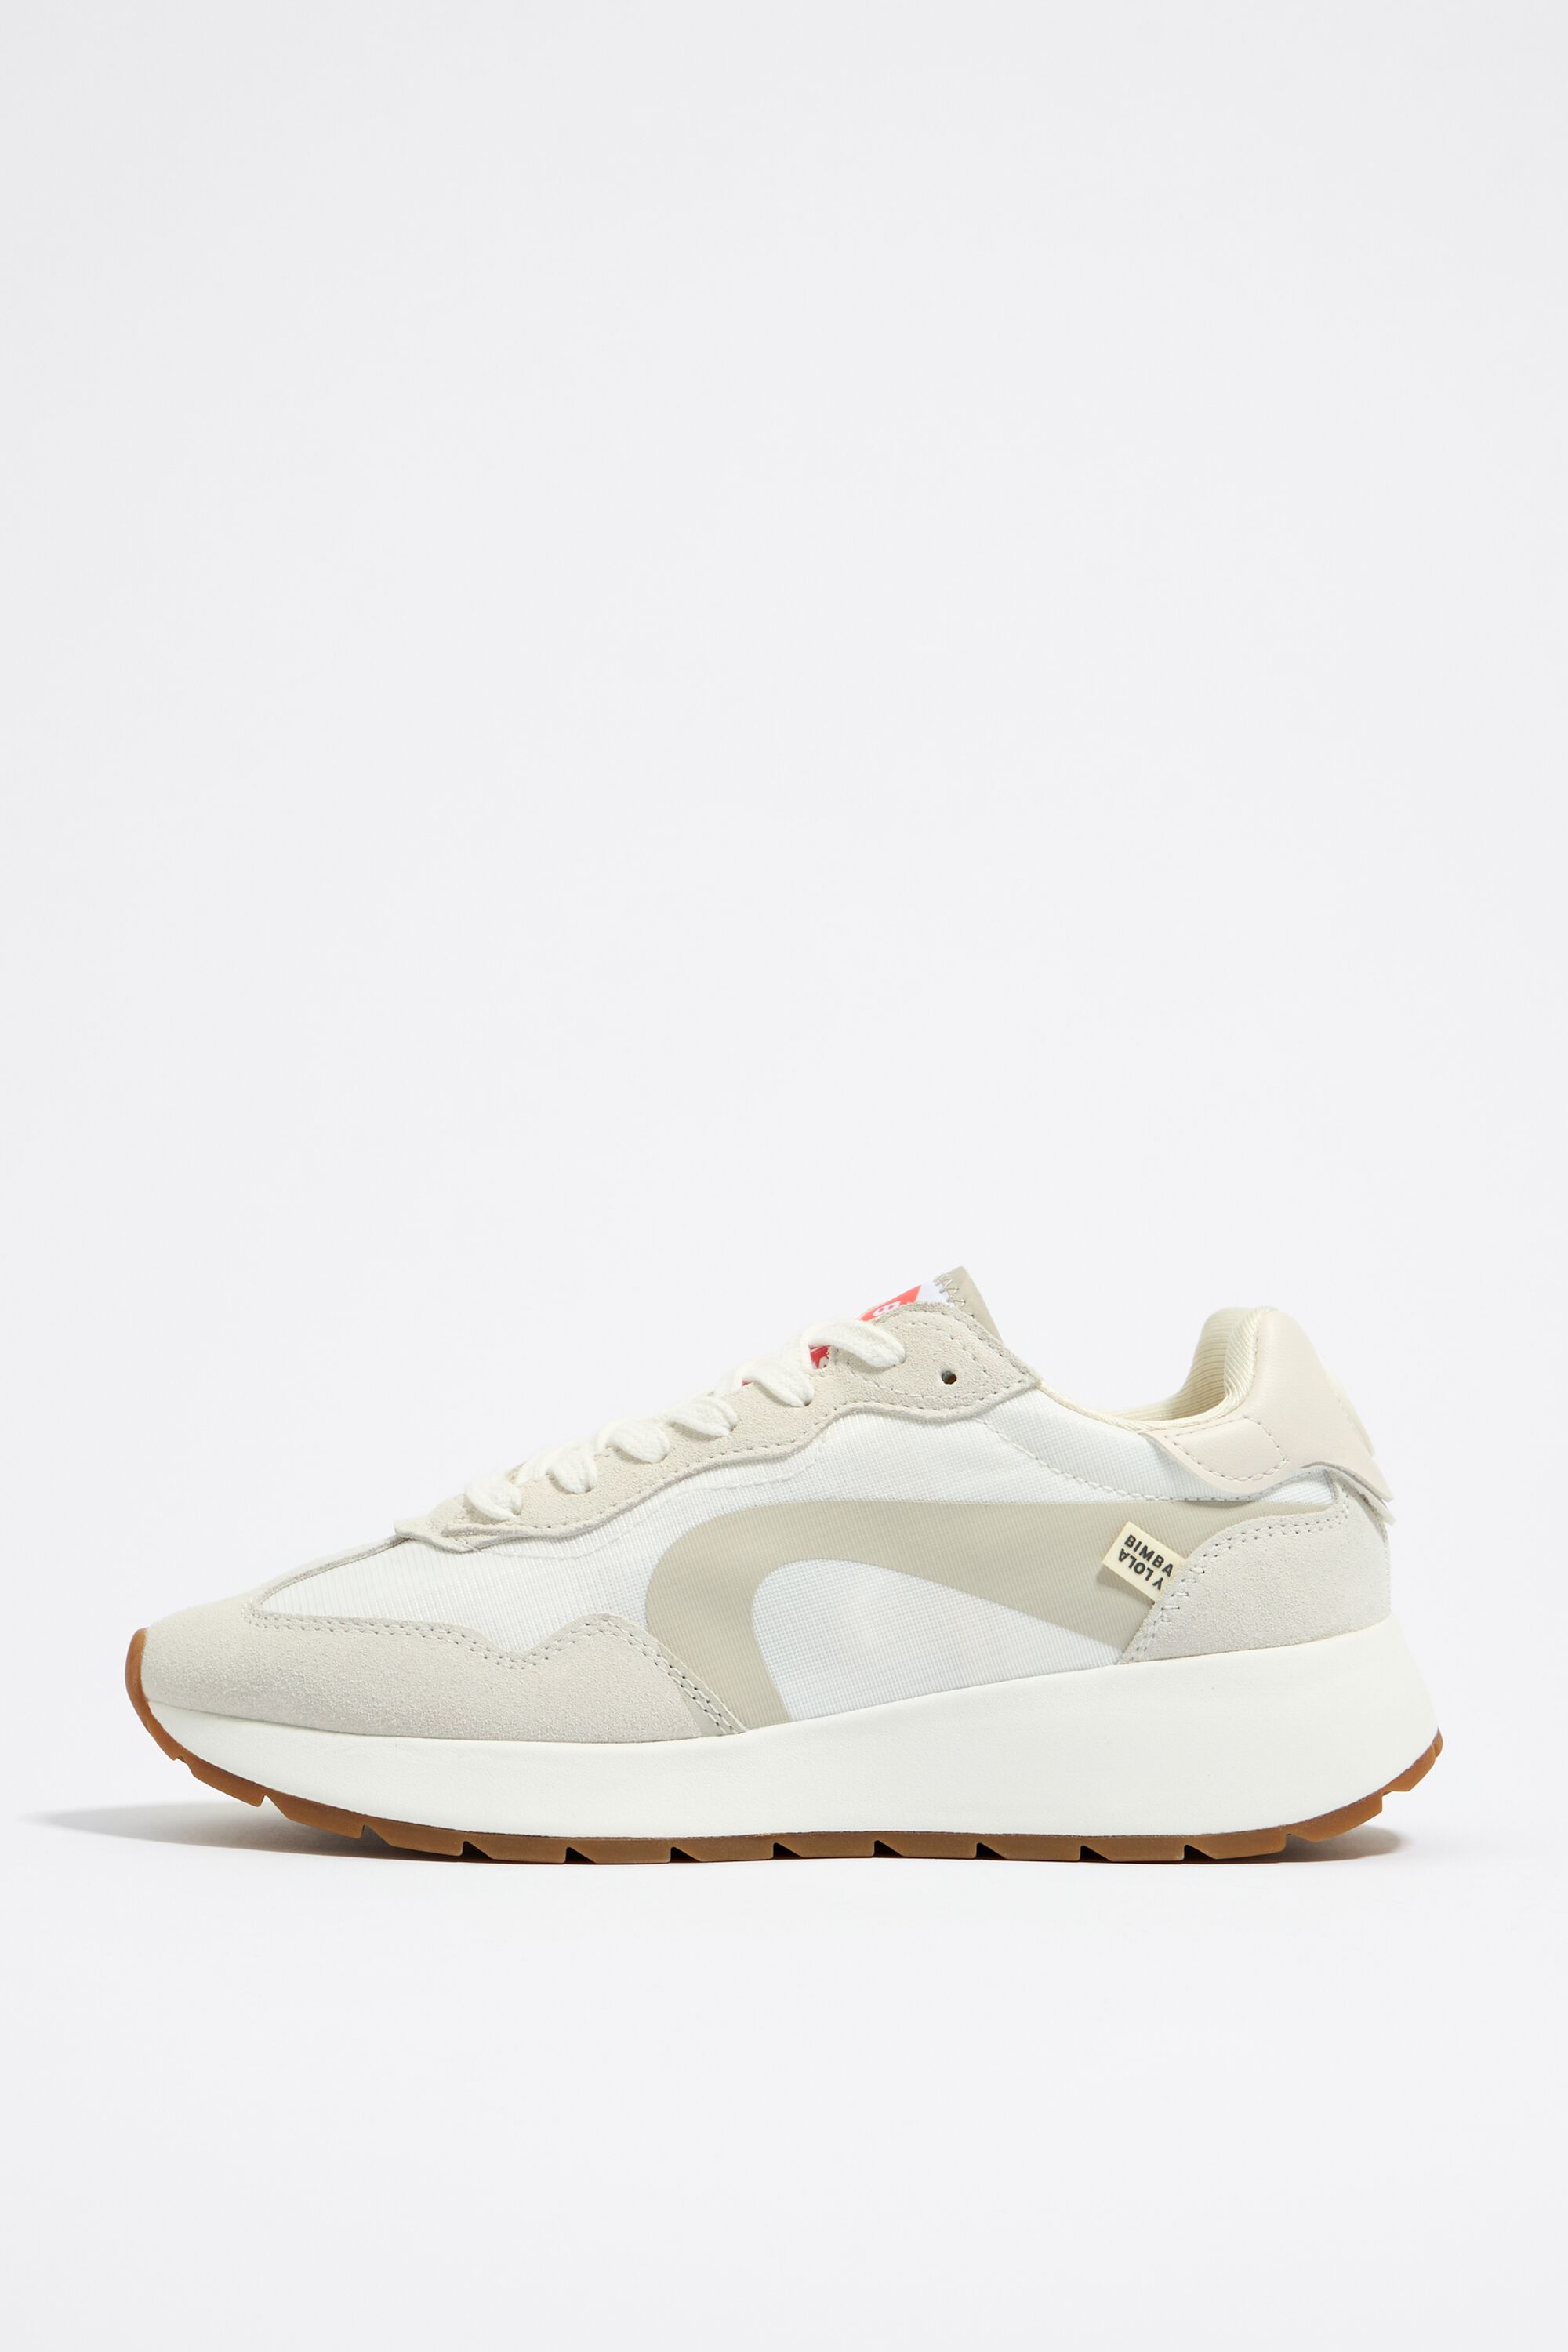 Bimba Y Lola Logo-embossed Leather Sneakers in White